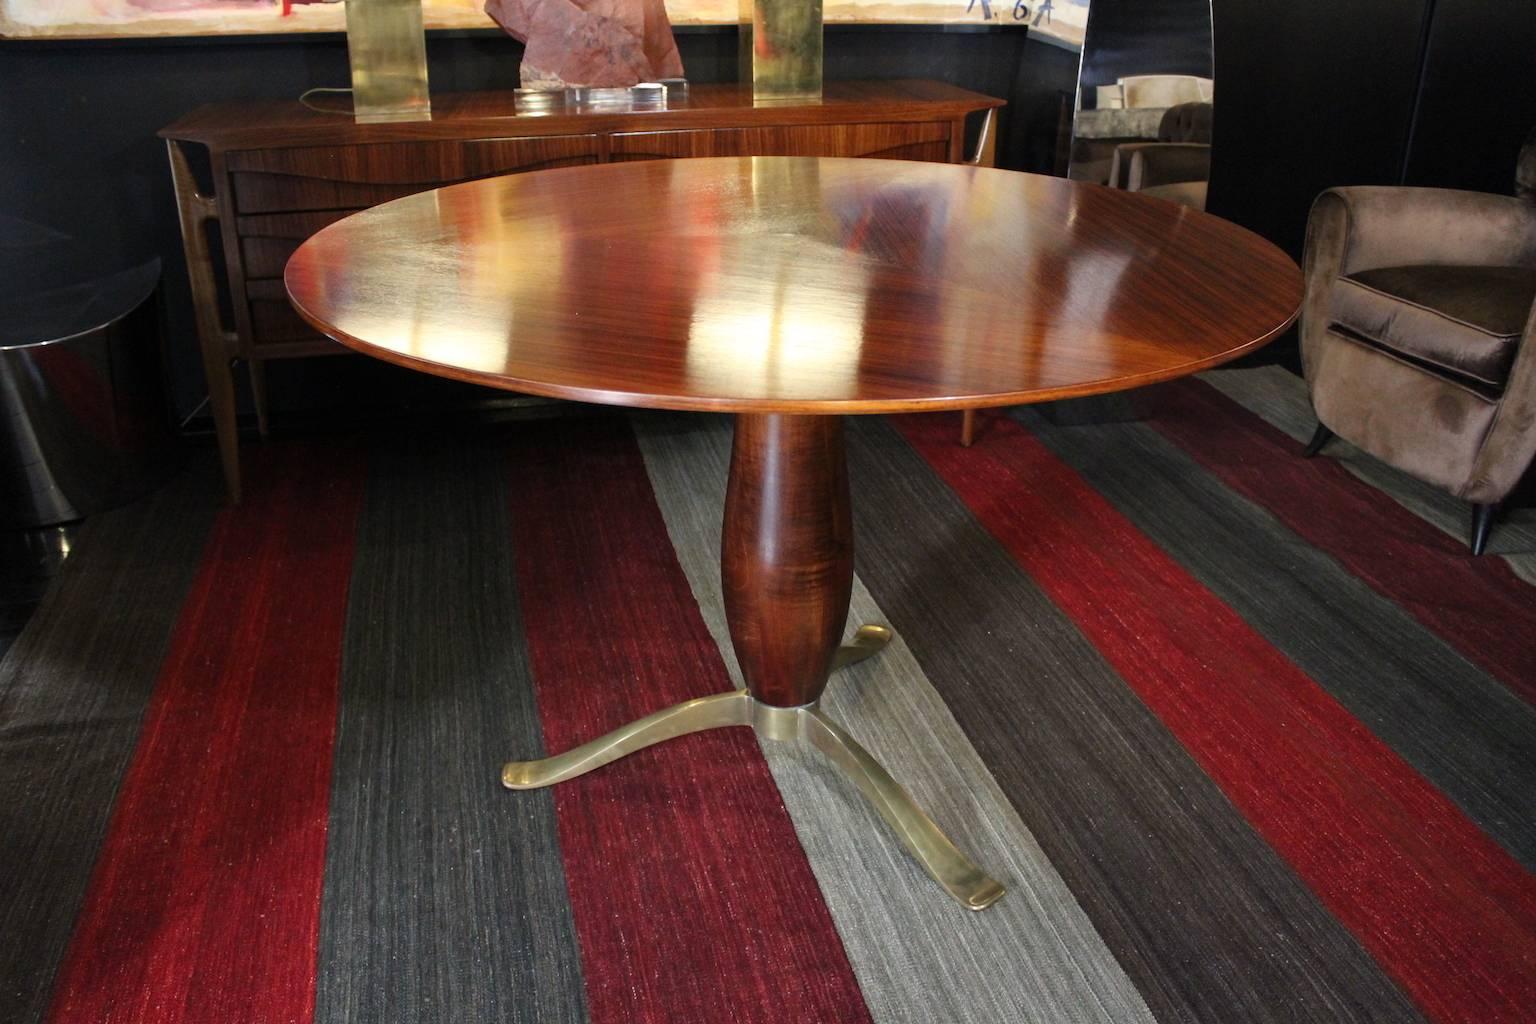 1940 round dining table made of rosewood, walnut and brass.